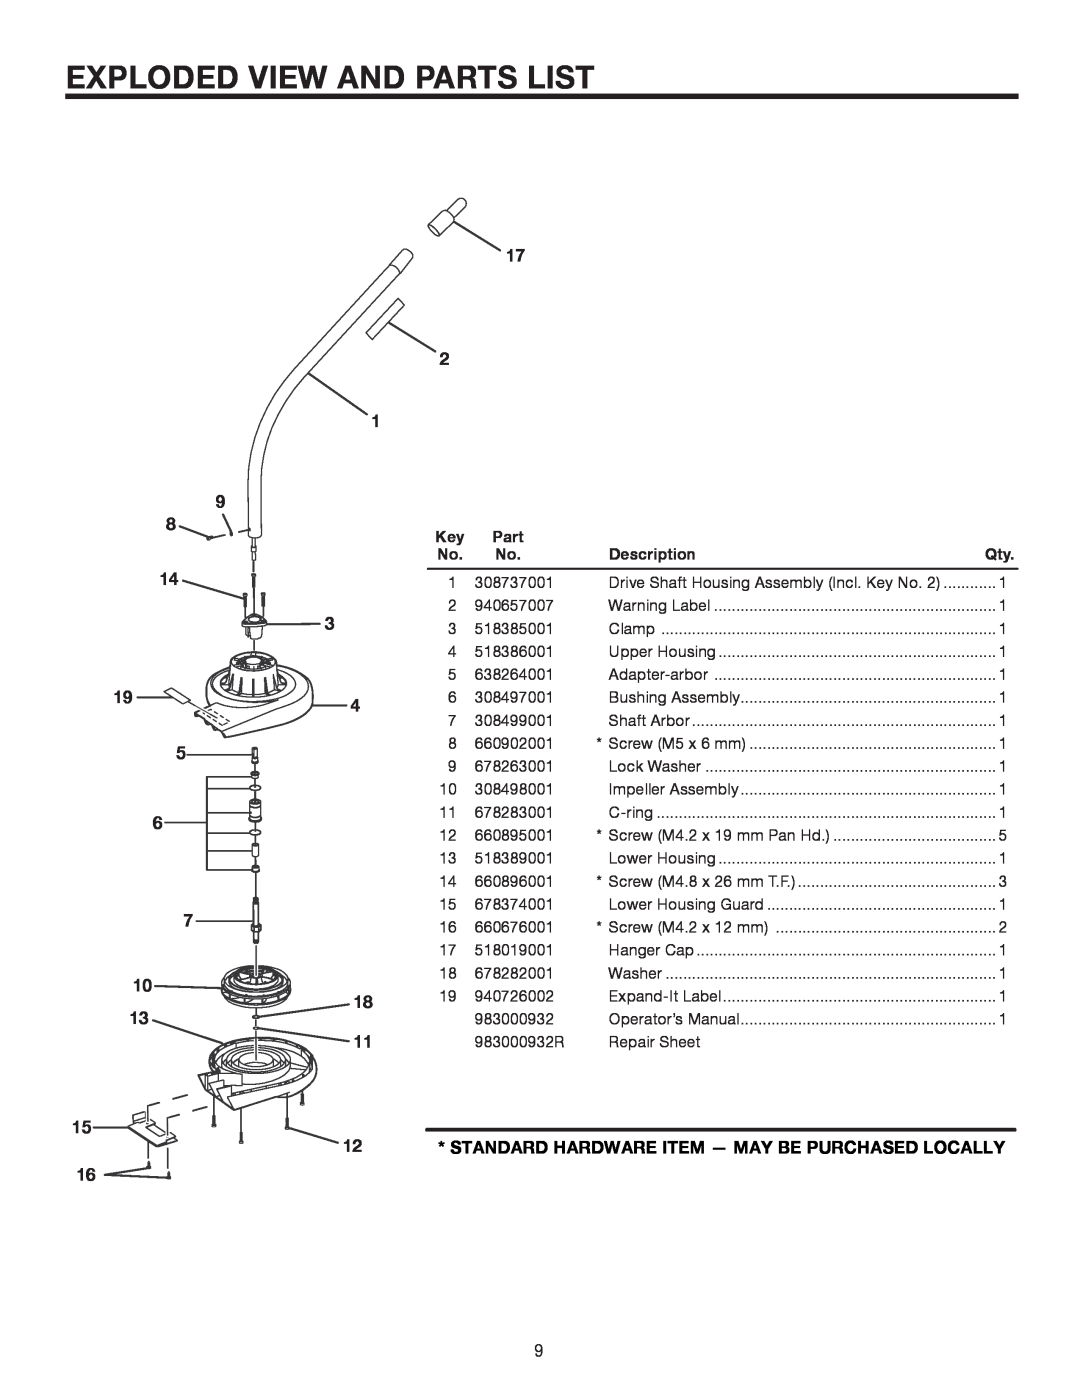 Ryobi UT15519E Exploded View And Parts List, 1 9 8 14 3 19 5 6 7 10, Standard Hardware Item - May Be Purchased Locally 